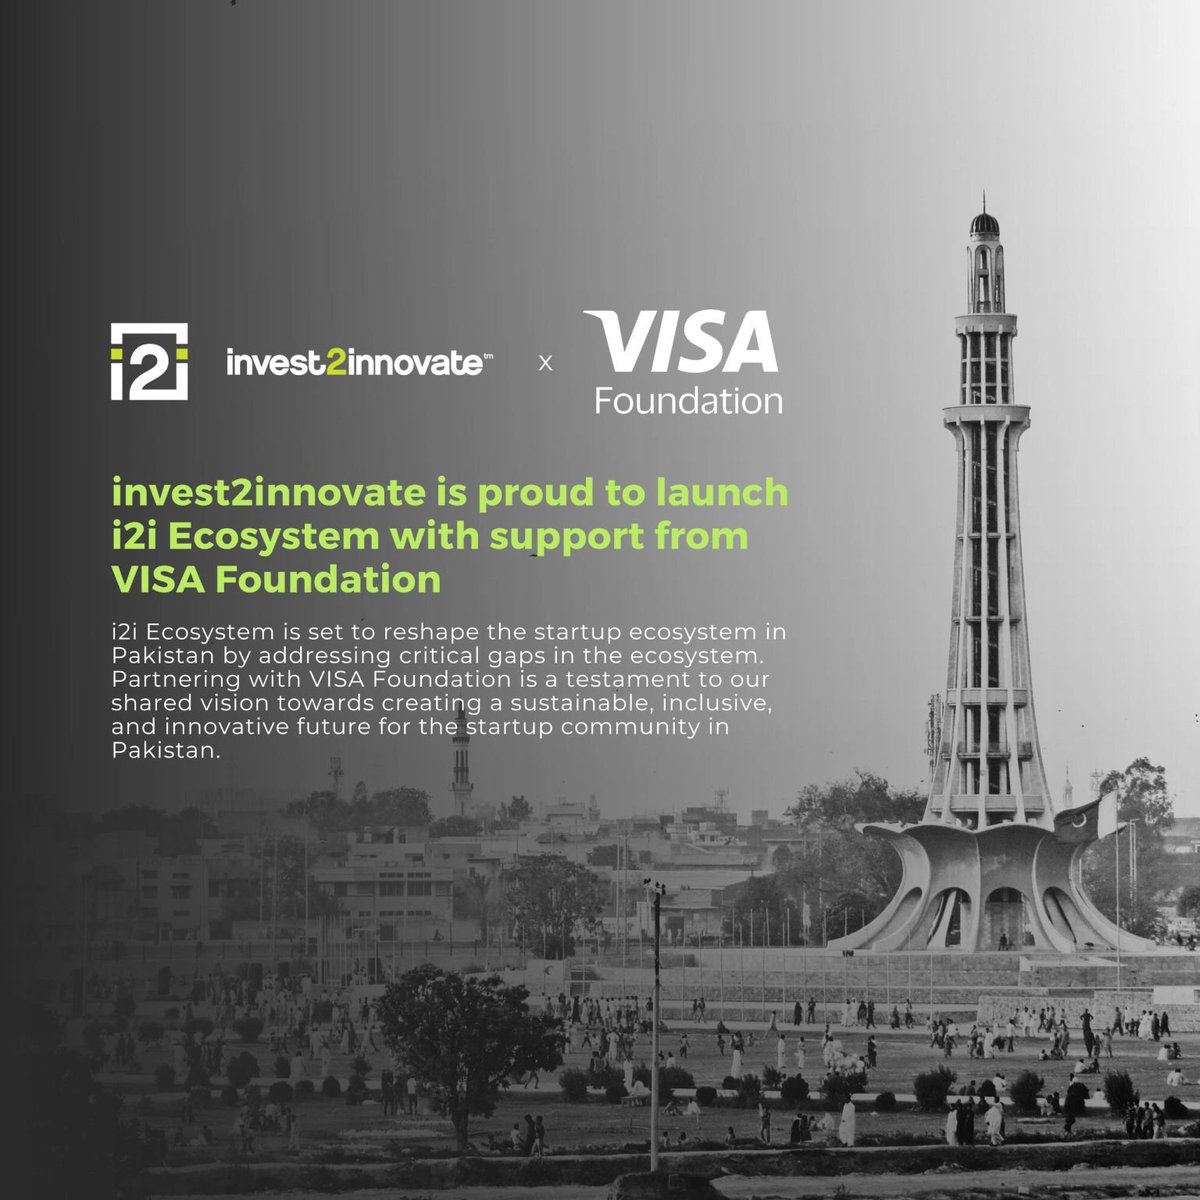 📢The team at our sister co @Invest2Innovate just announced #i2iEcosystem, a new initiative supported by the @Visa Foundation to bolster the #Pakistan startup ecosystem. This includes 3 components: (1) an investor-founder discovery platform, (2) curated meetups & events and 🥁: